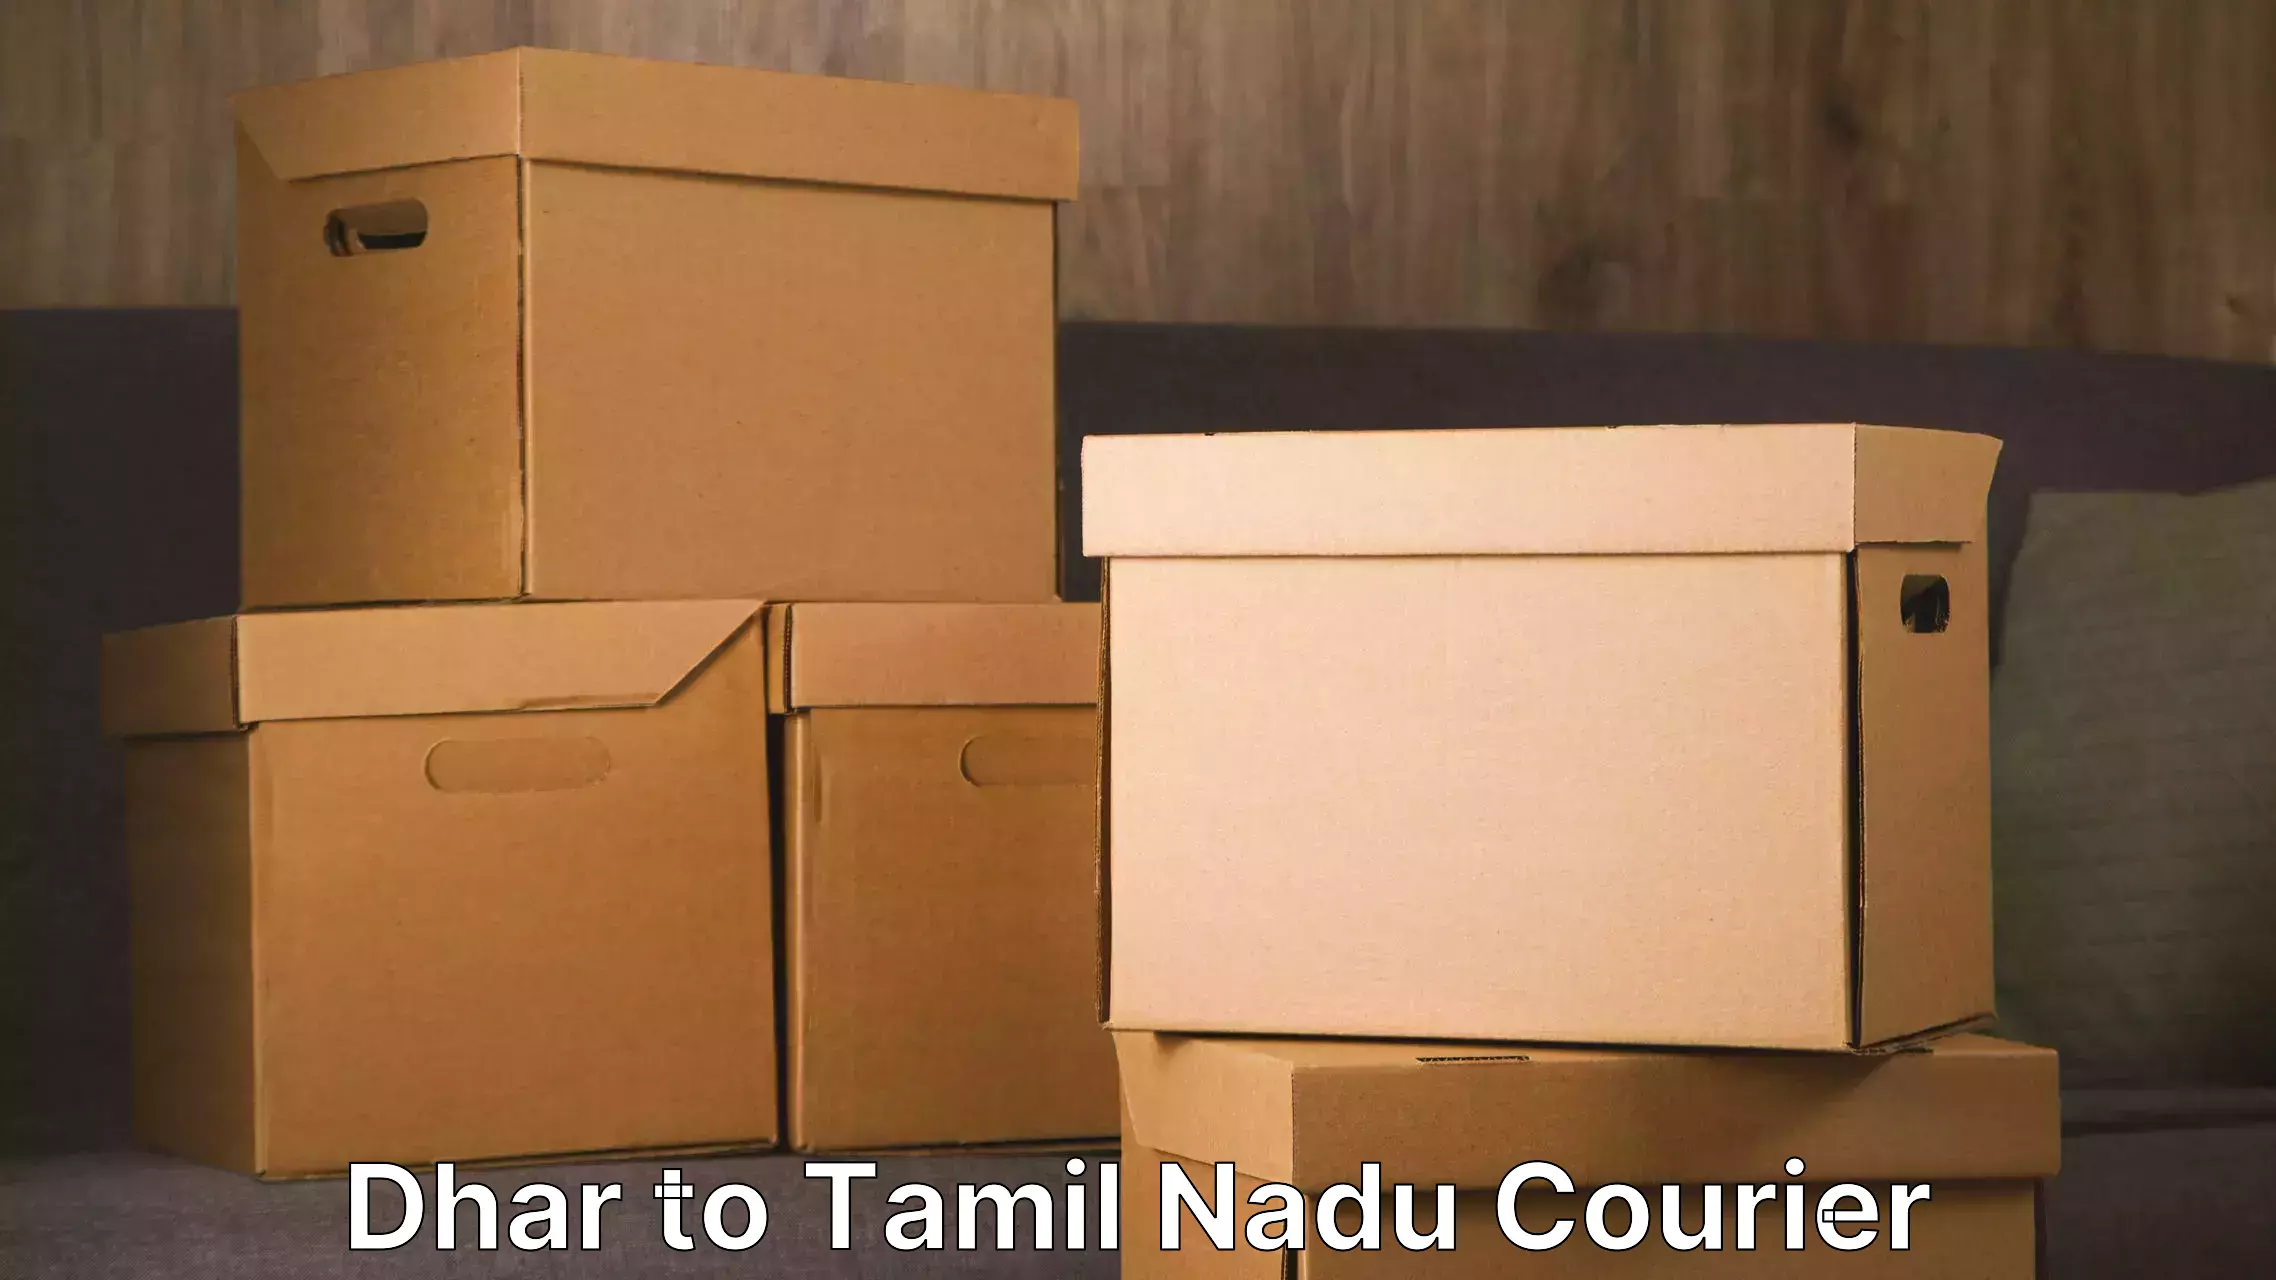 Reliable furniture movers Dhar to Ennore Port Chennai